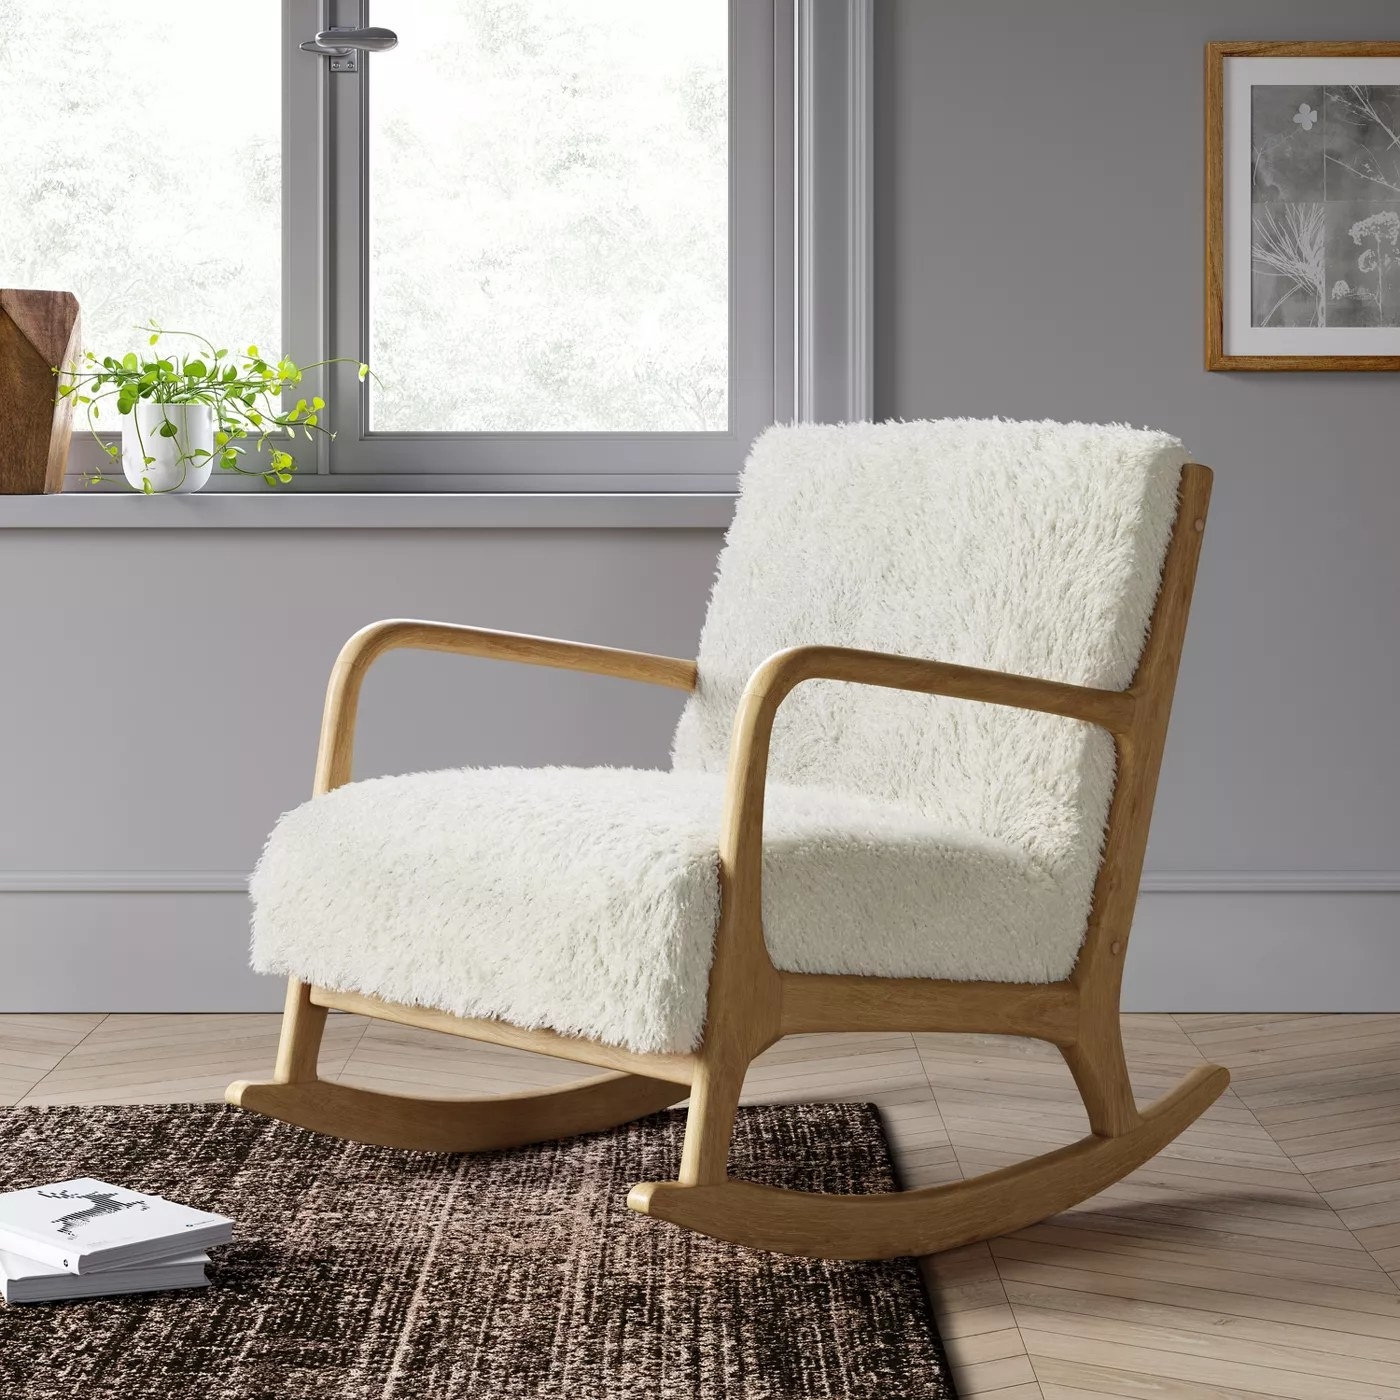 The rocking chair in a living room